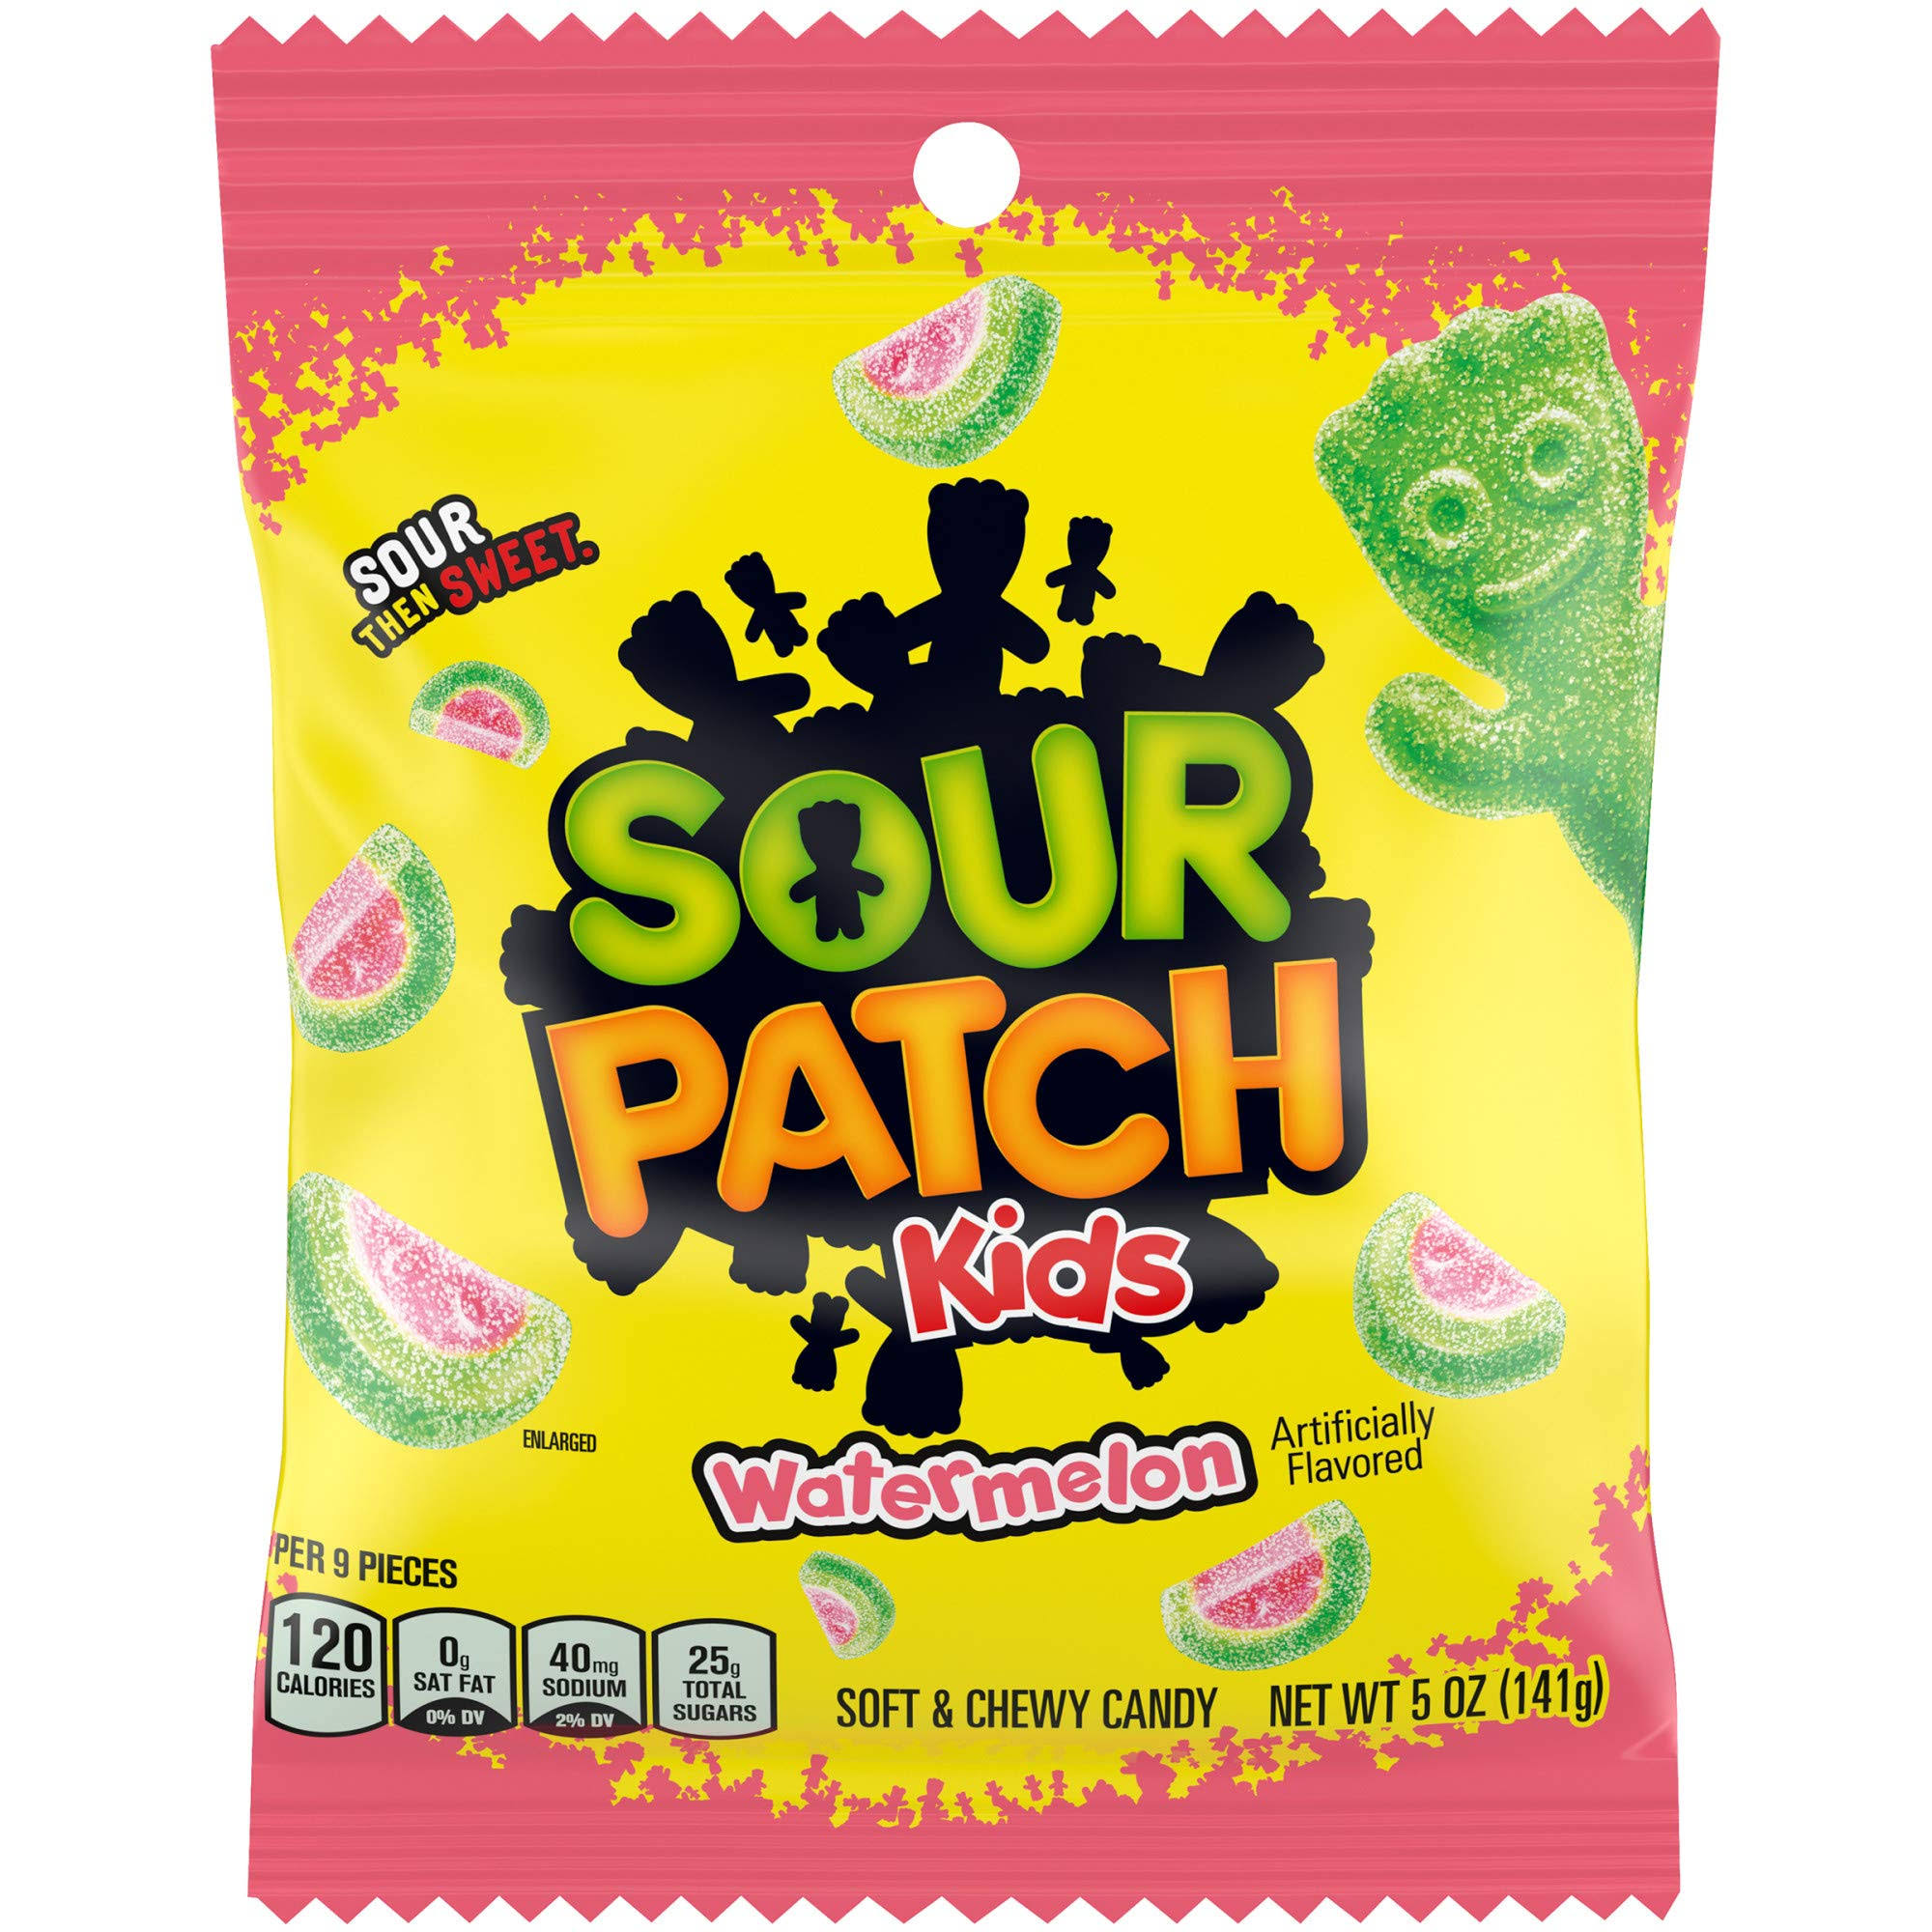 Sour Patch Soft and Chewy Candy - Watermelon, 5 Oz